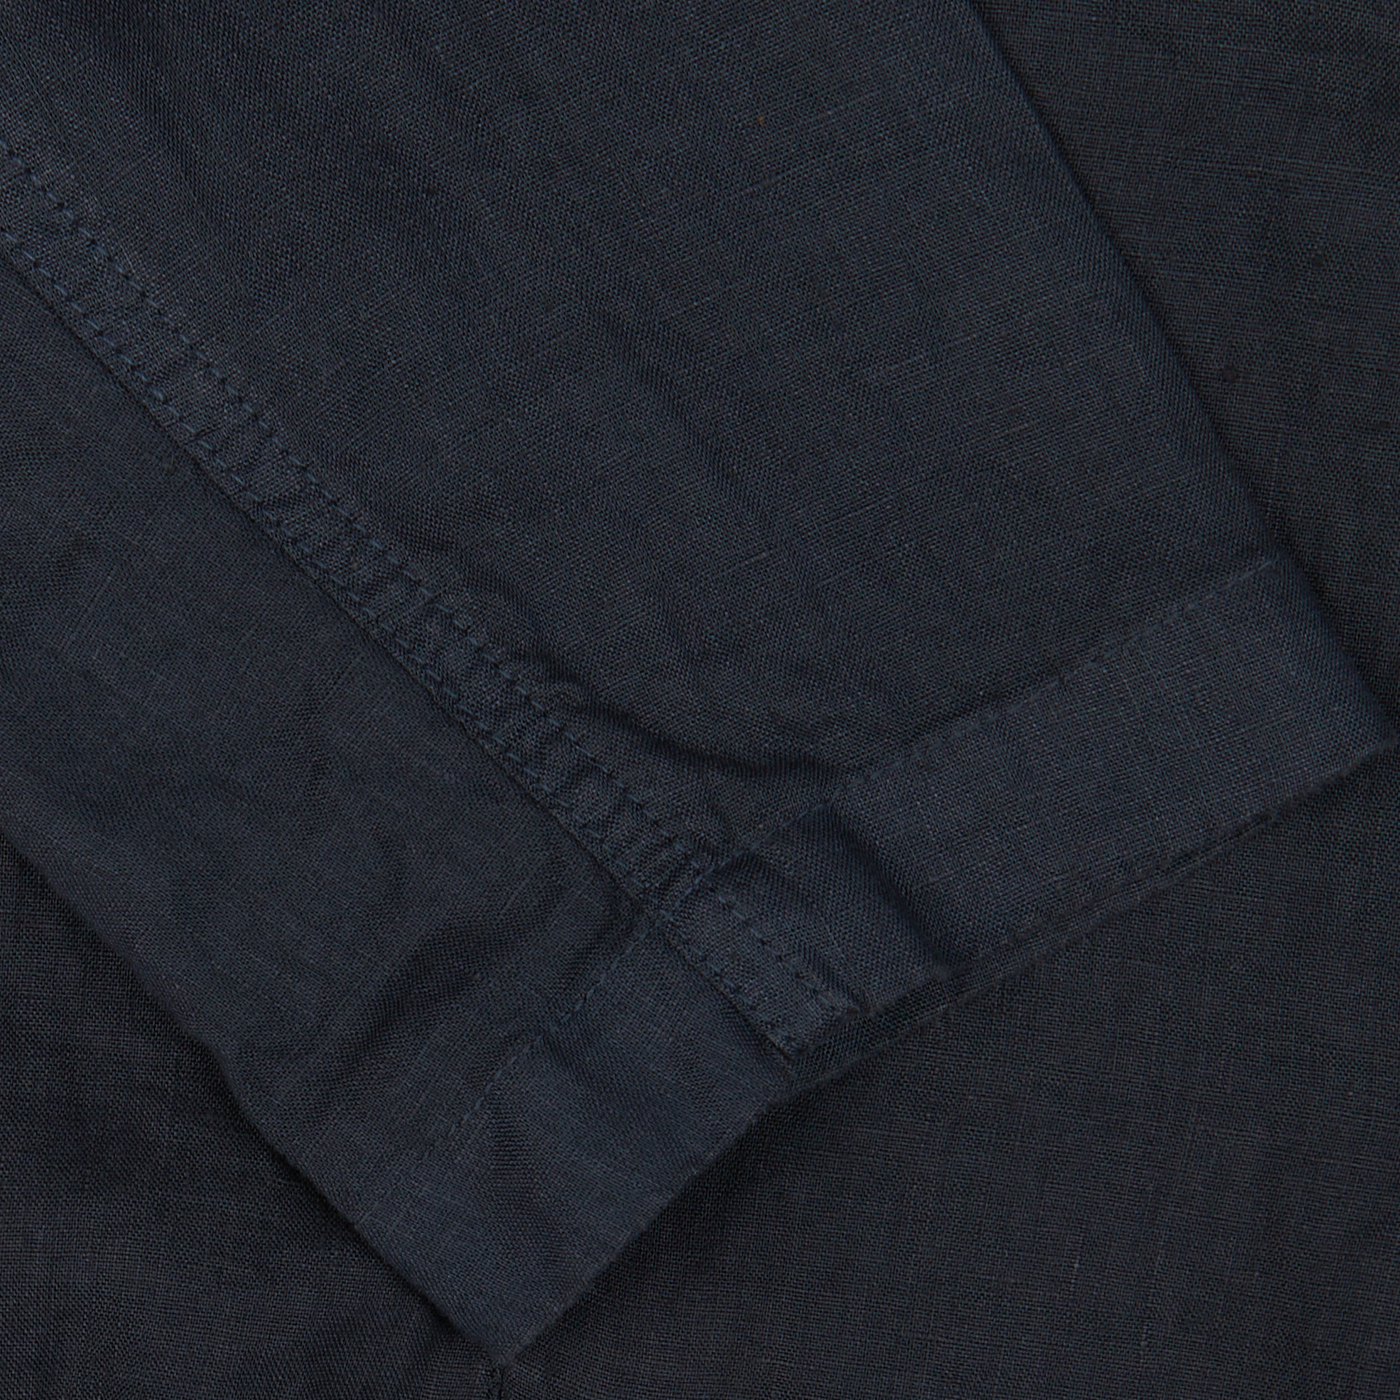 Close-up of Navy Blue Washed Linen Samuraki Jacket fabric with visible seam and stitching detail by Aspesi.